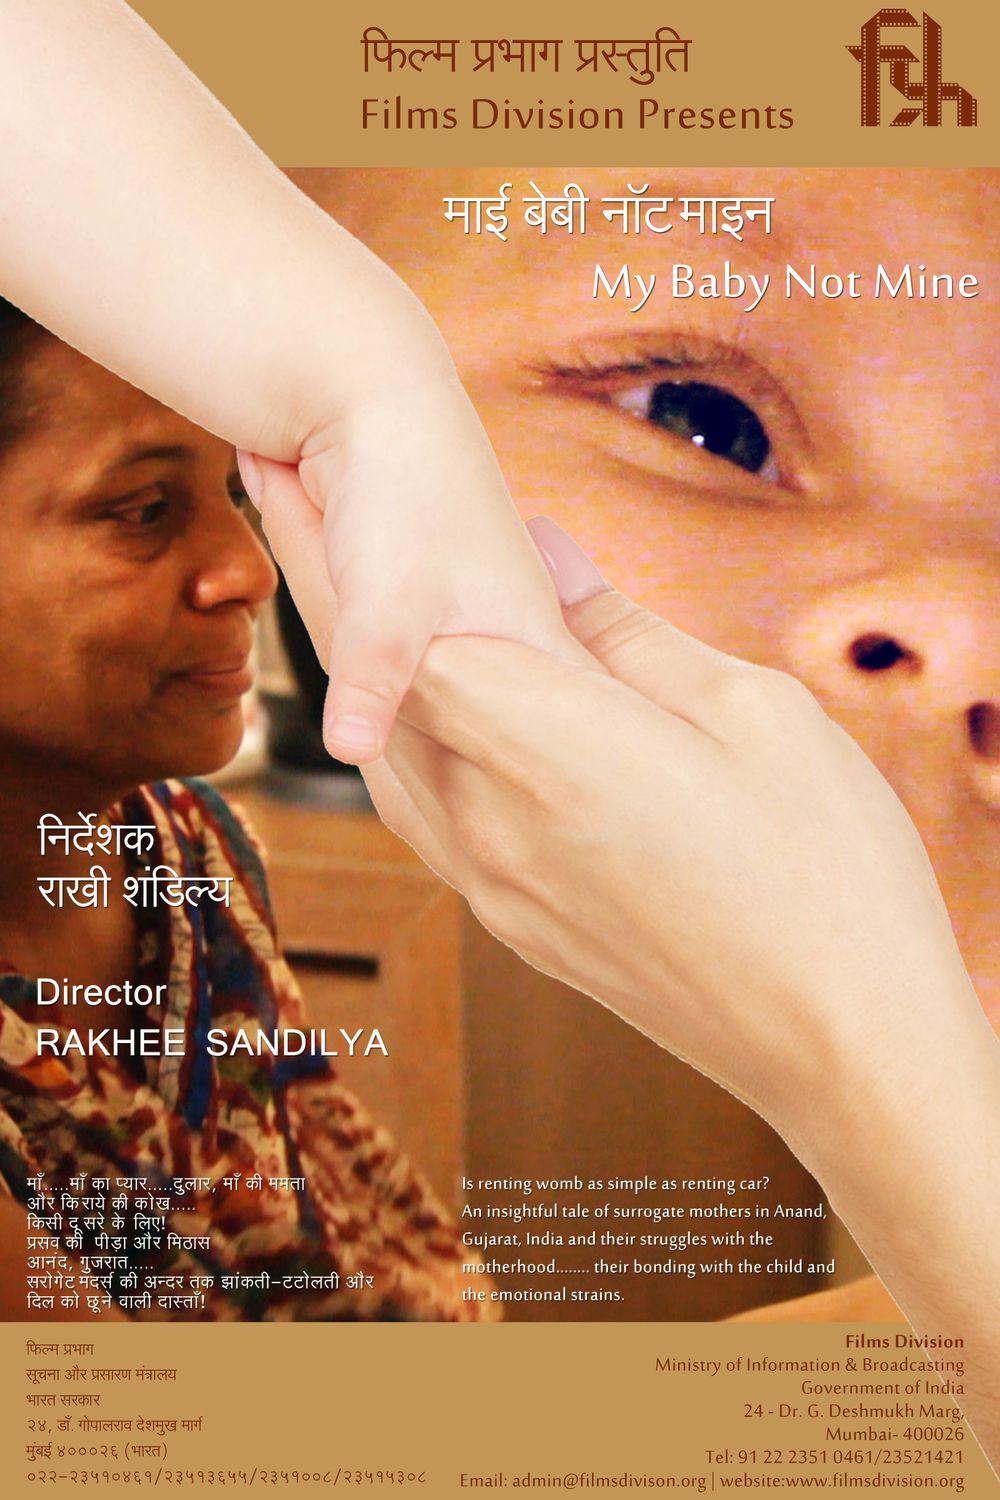 My Baby Not Mine Movie Review